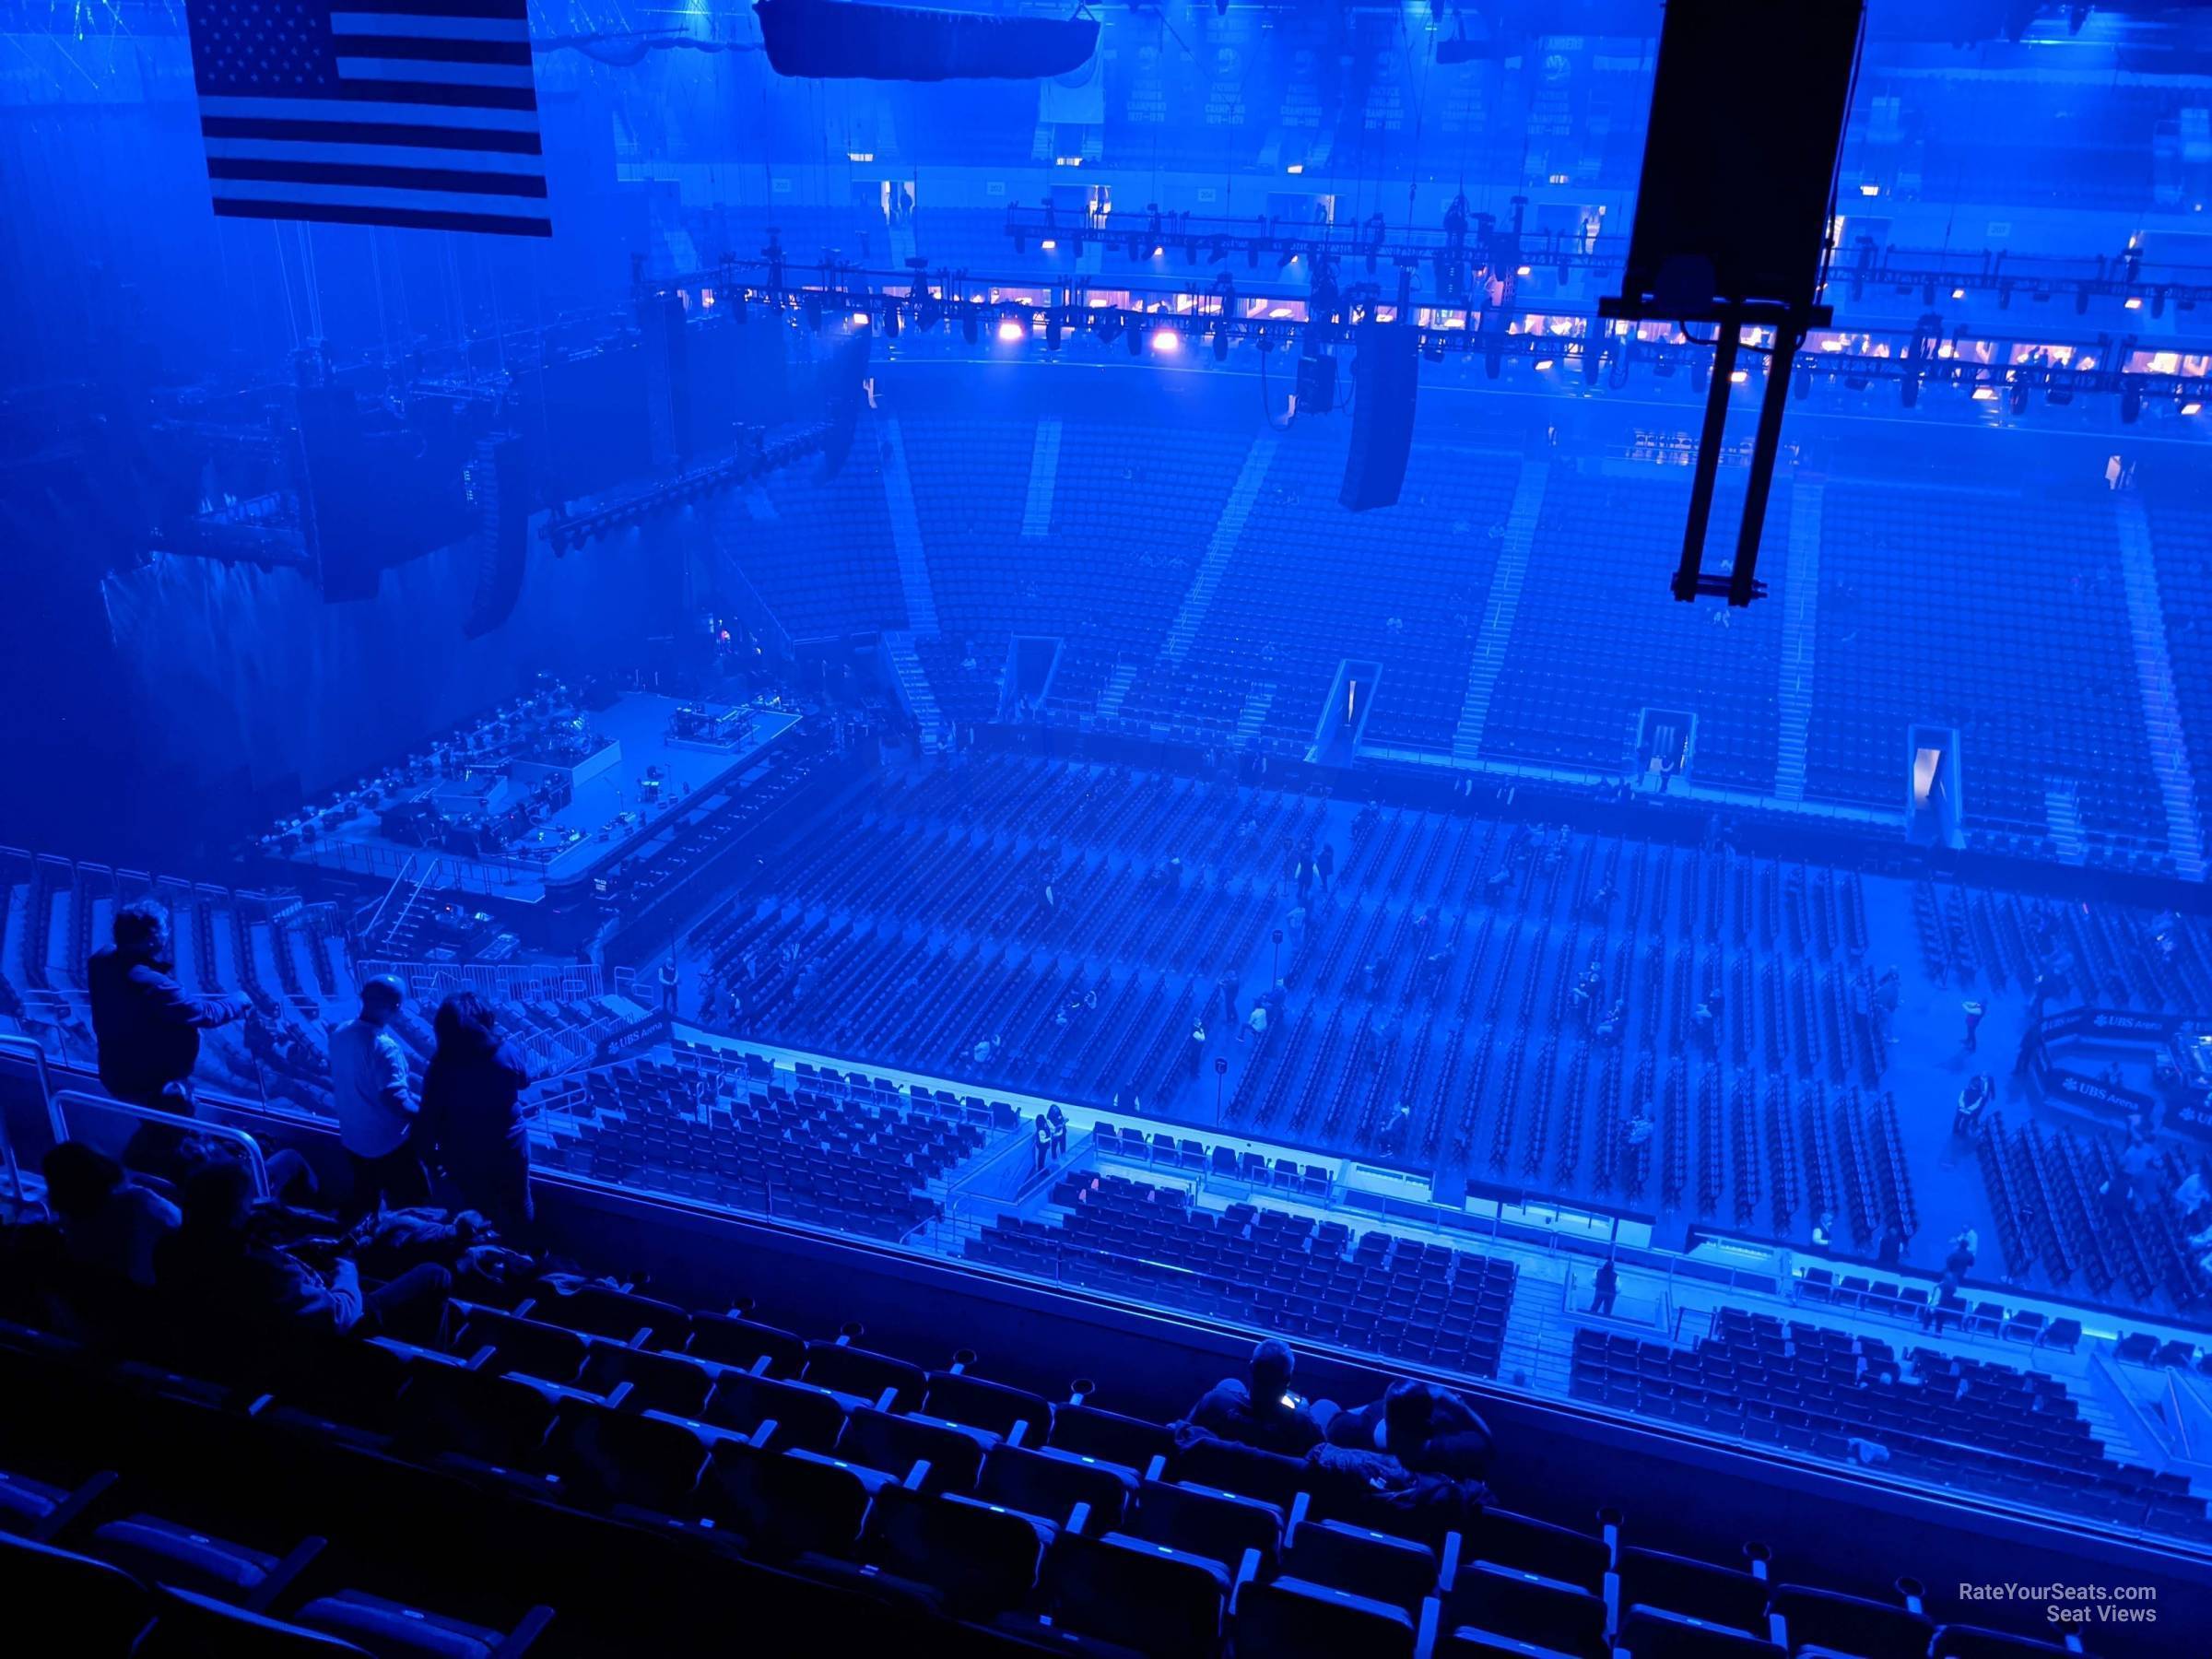 section 321, row 8 seat view  for concert - ubs arena